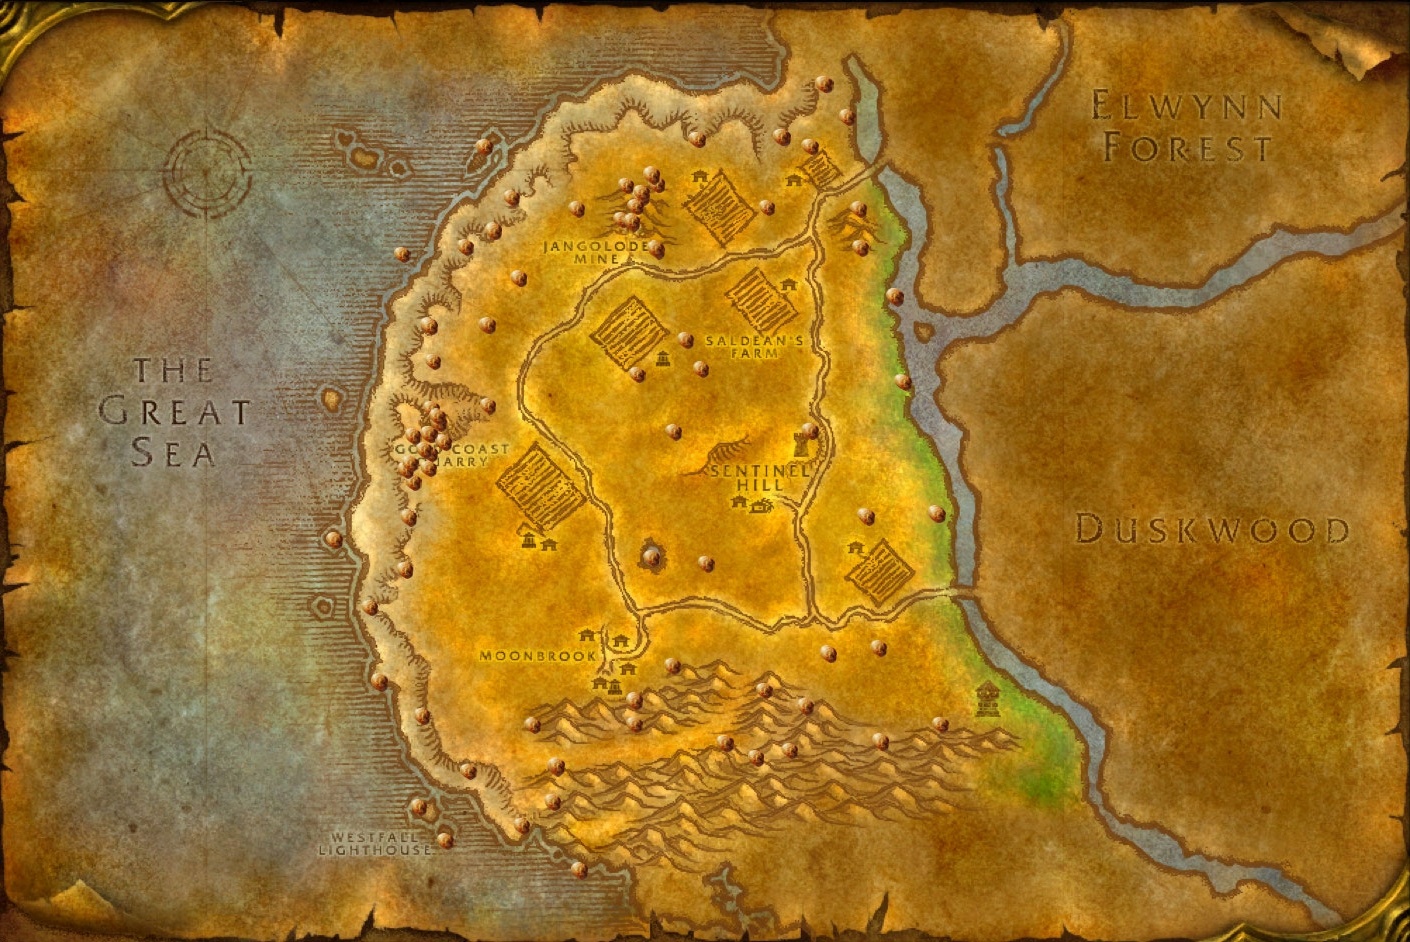 TBC Classic Mining Profession and Leveling Guide - TBC Classic - Icy Veins